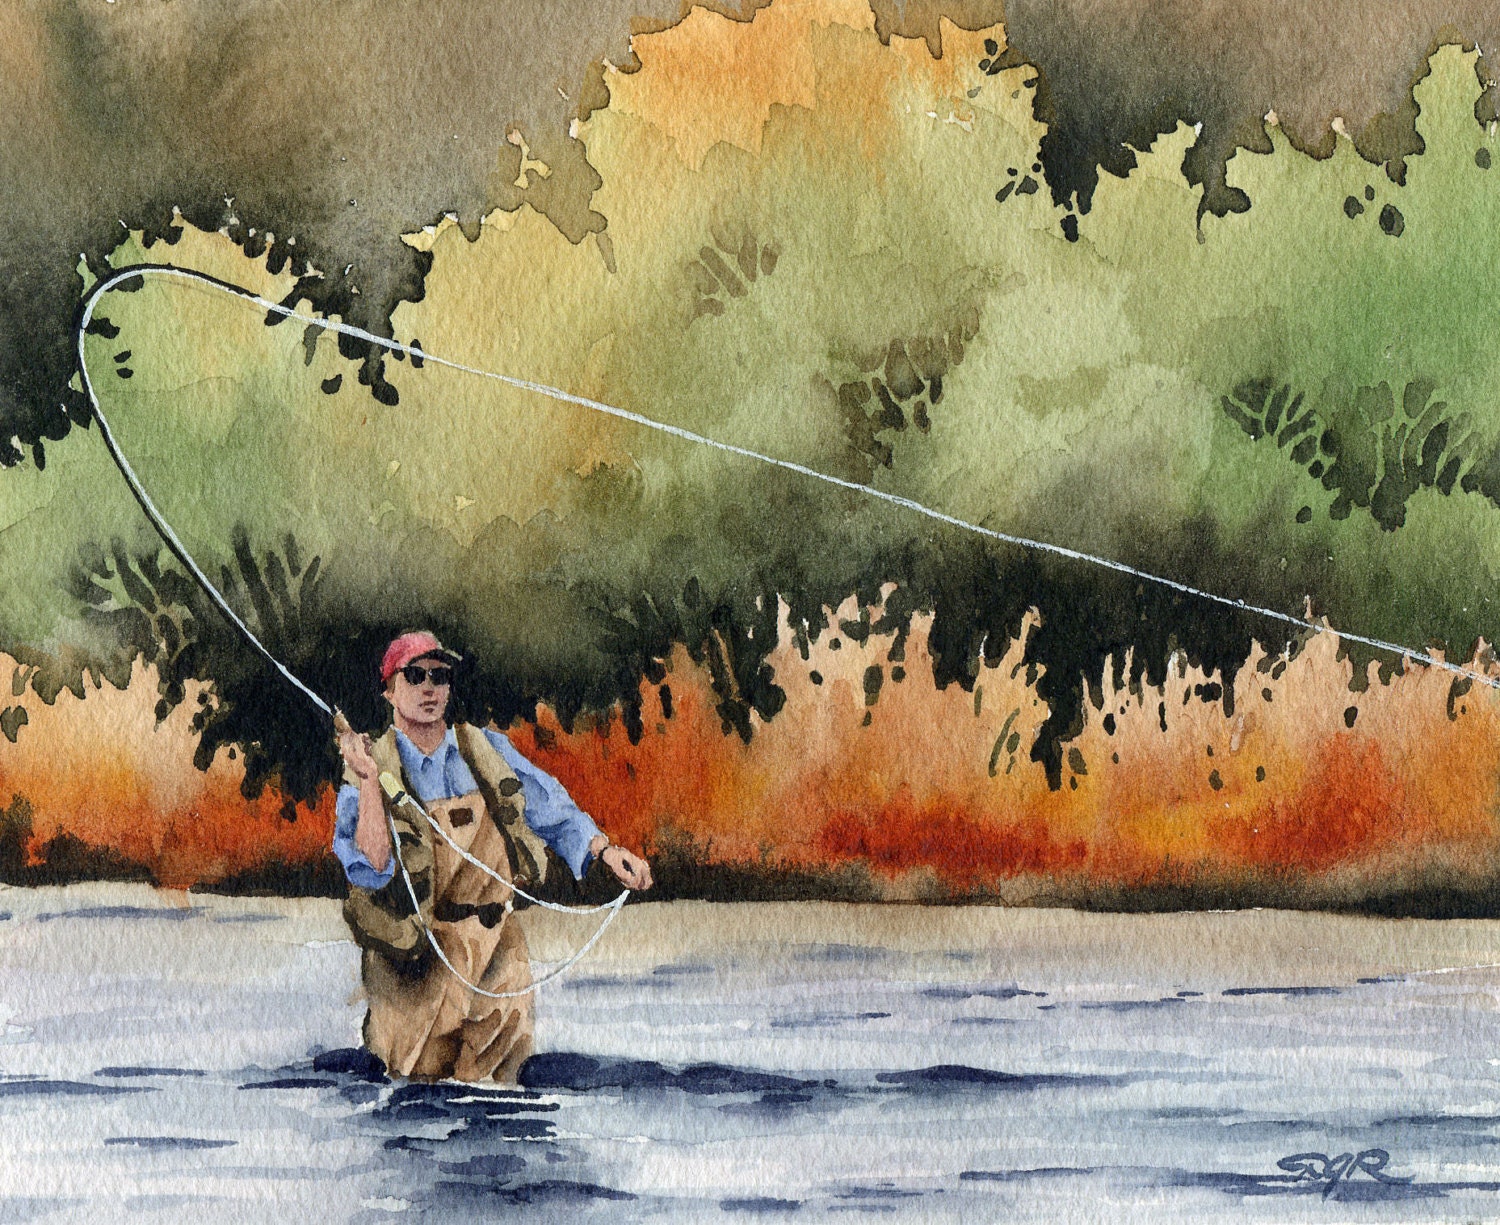 Fly fishing Art Print - Hooked Up - Watercolor Painting - Angling Art by  Artist DJ Rogers - Wall Decor